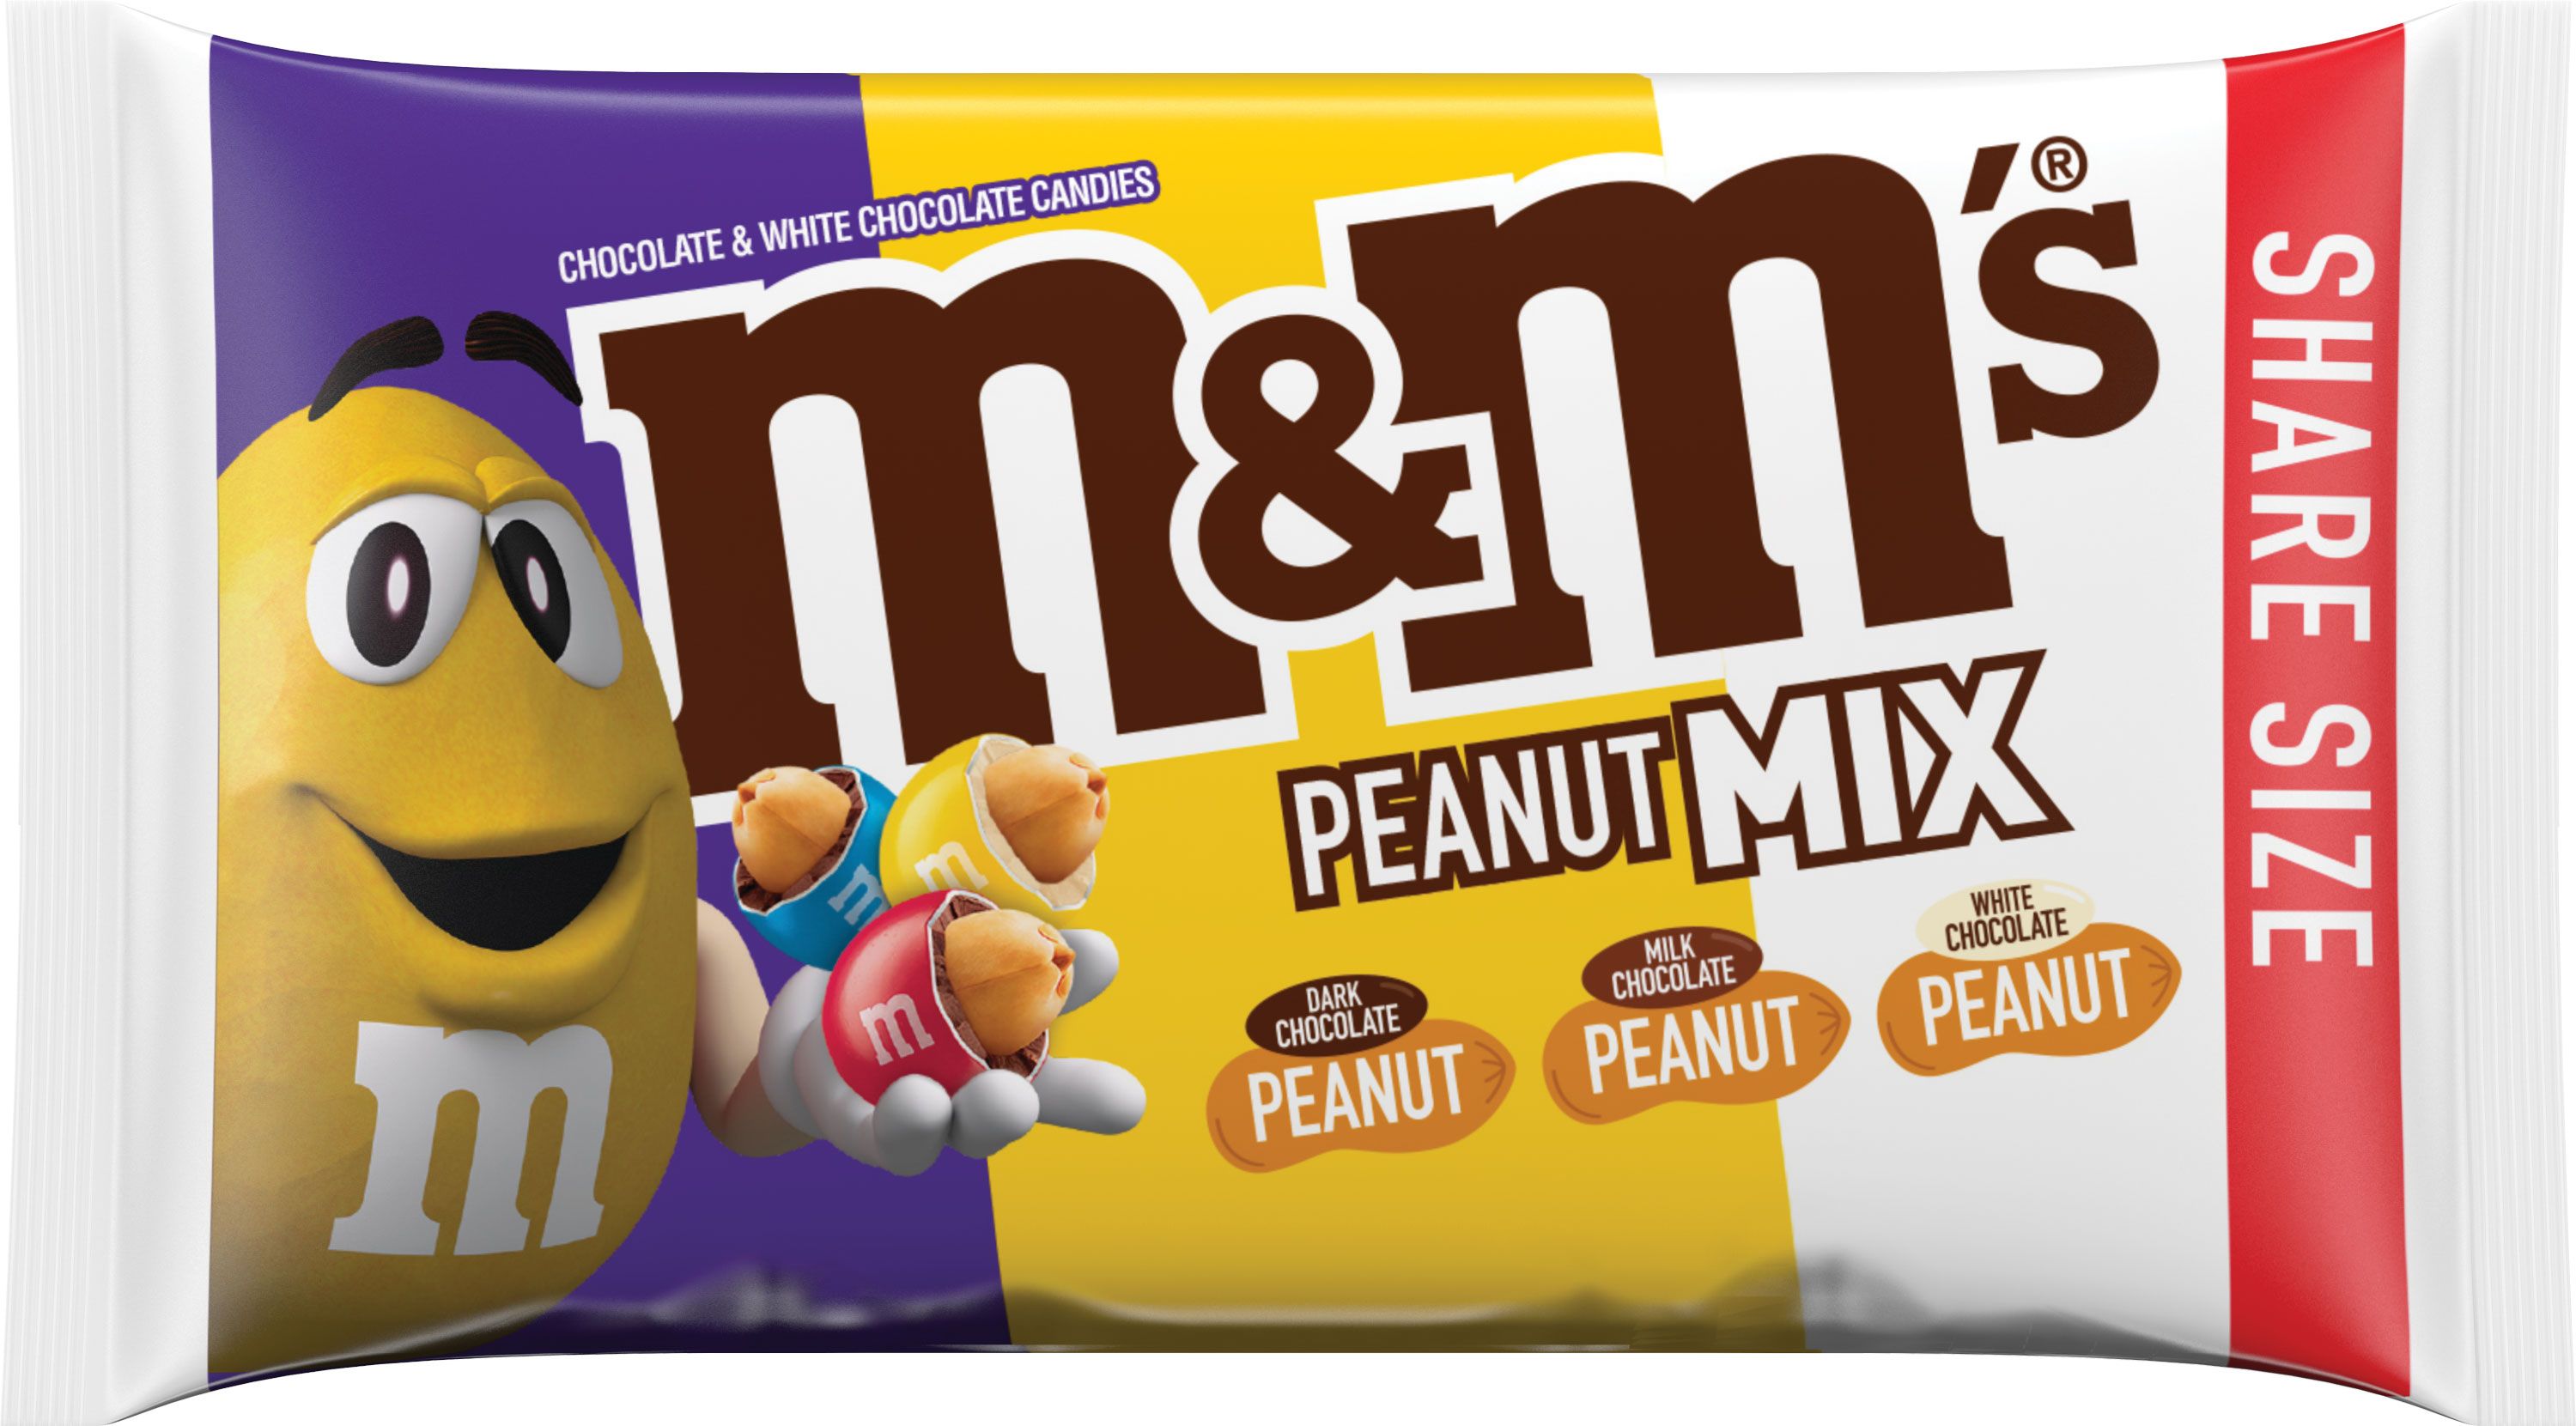 M&M's Classic Mix of Peanut, Peanut Butter & Milk Chocolate Candy, Sharing  Size